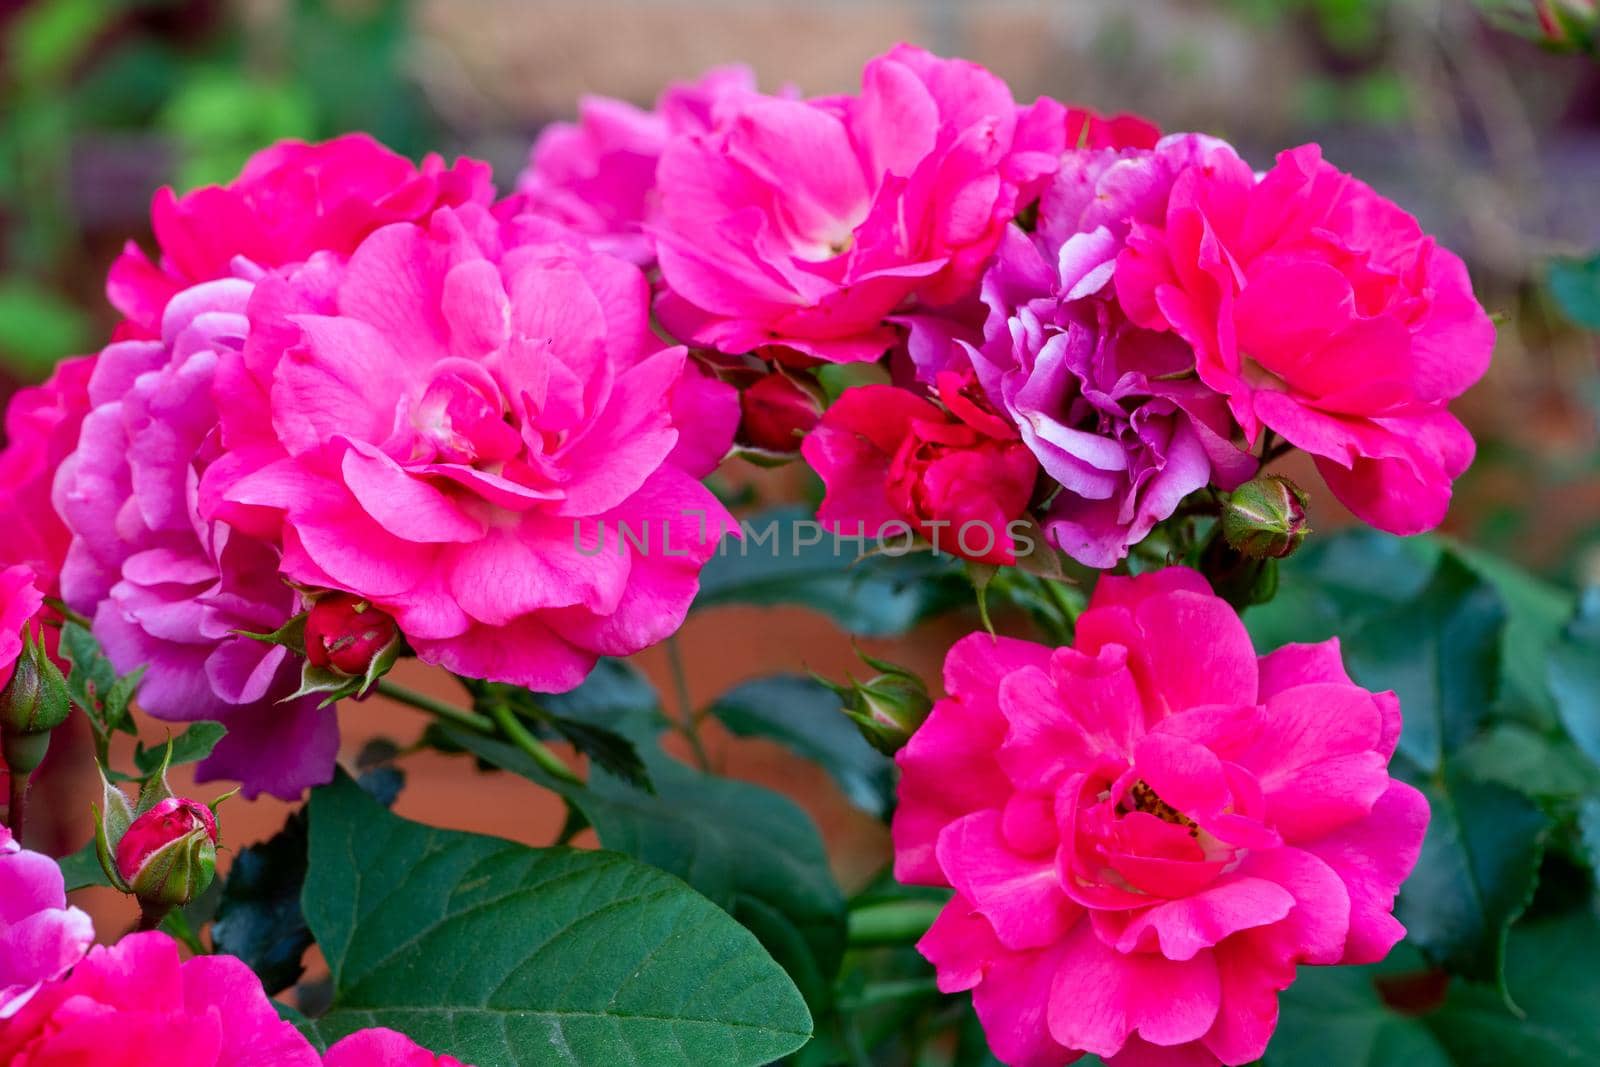 Roses floribunda bright pink red flowers in garden lawn. A bed of beautiful flowering roses in a garden setting by Serhii_Voroshchuk